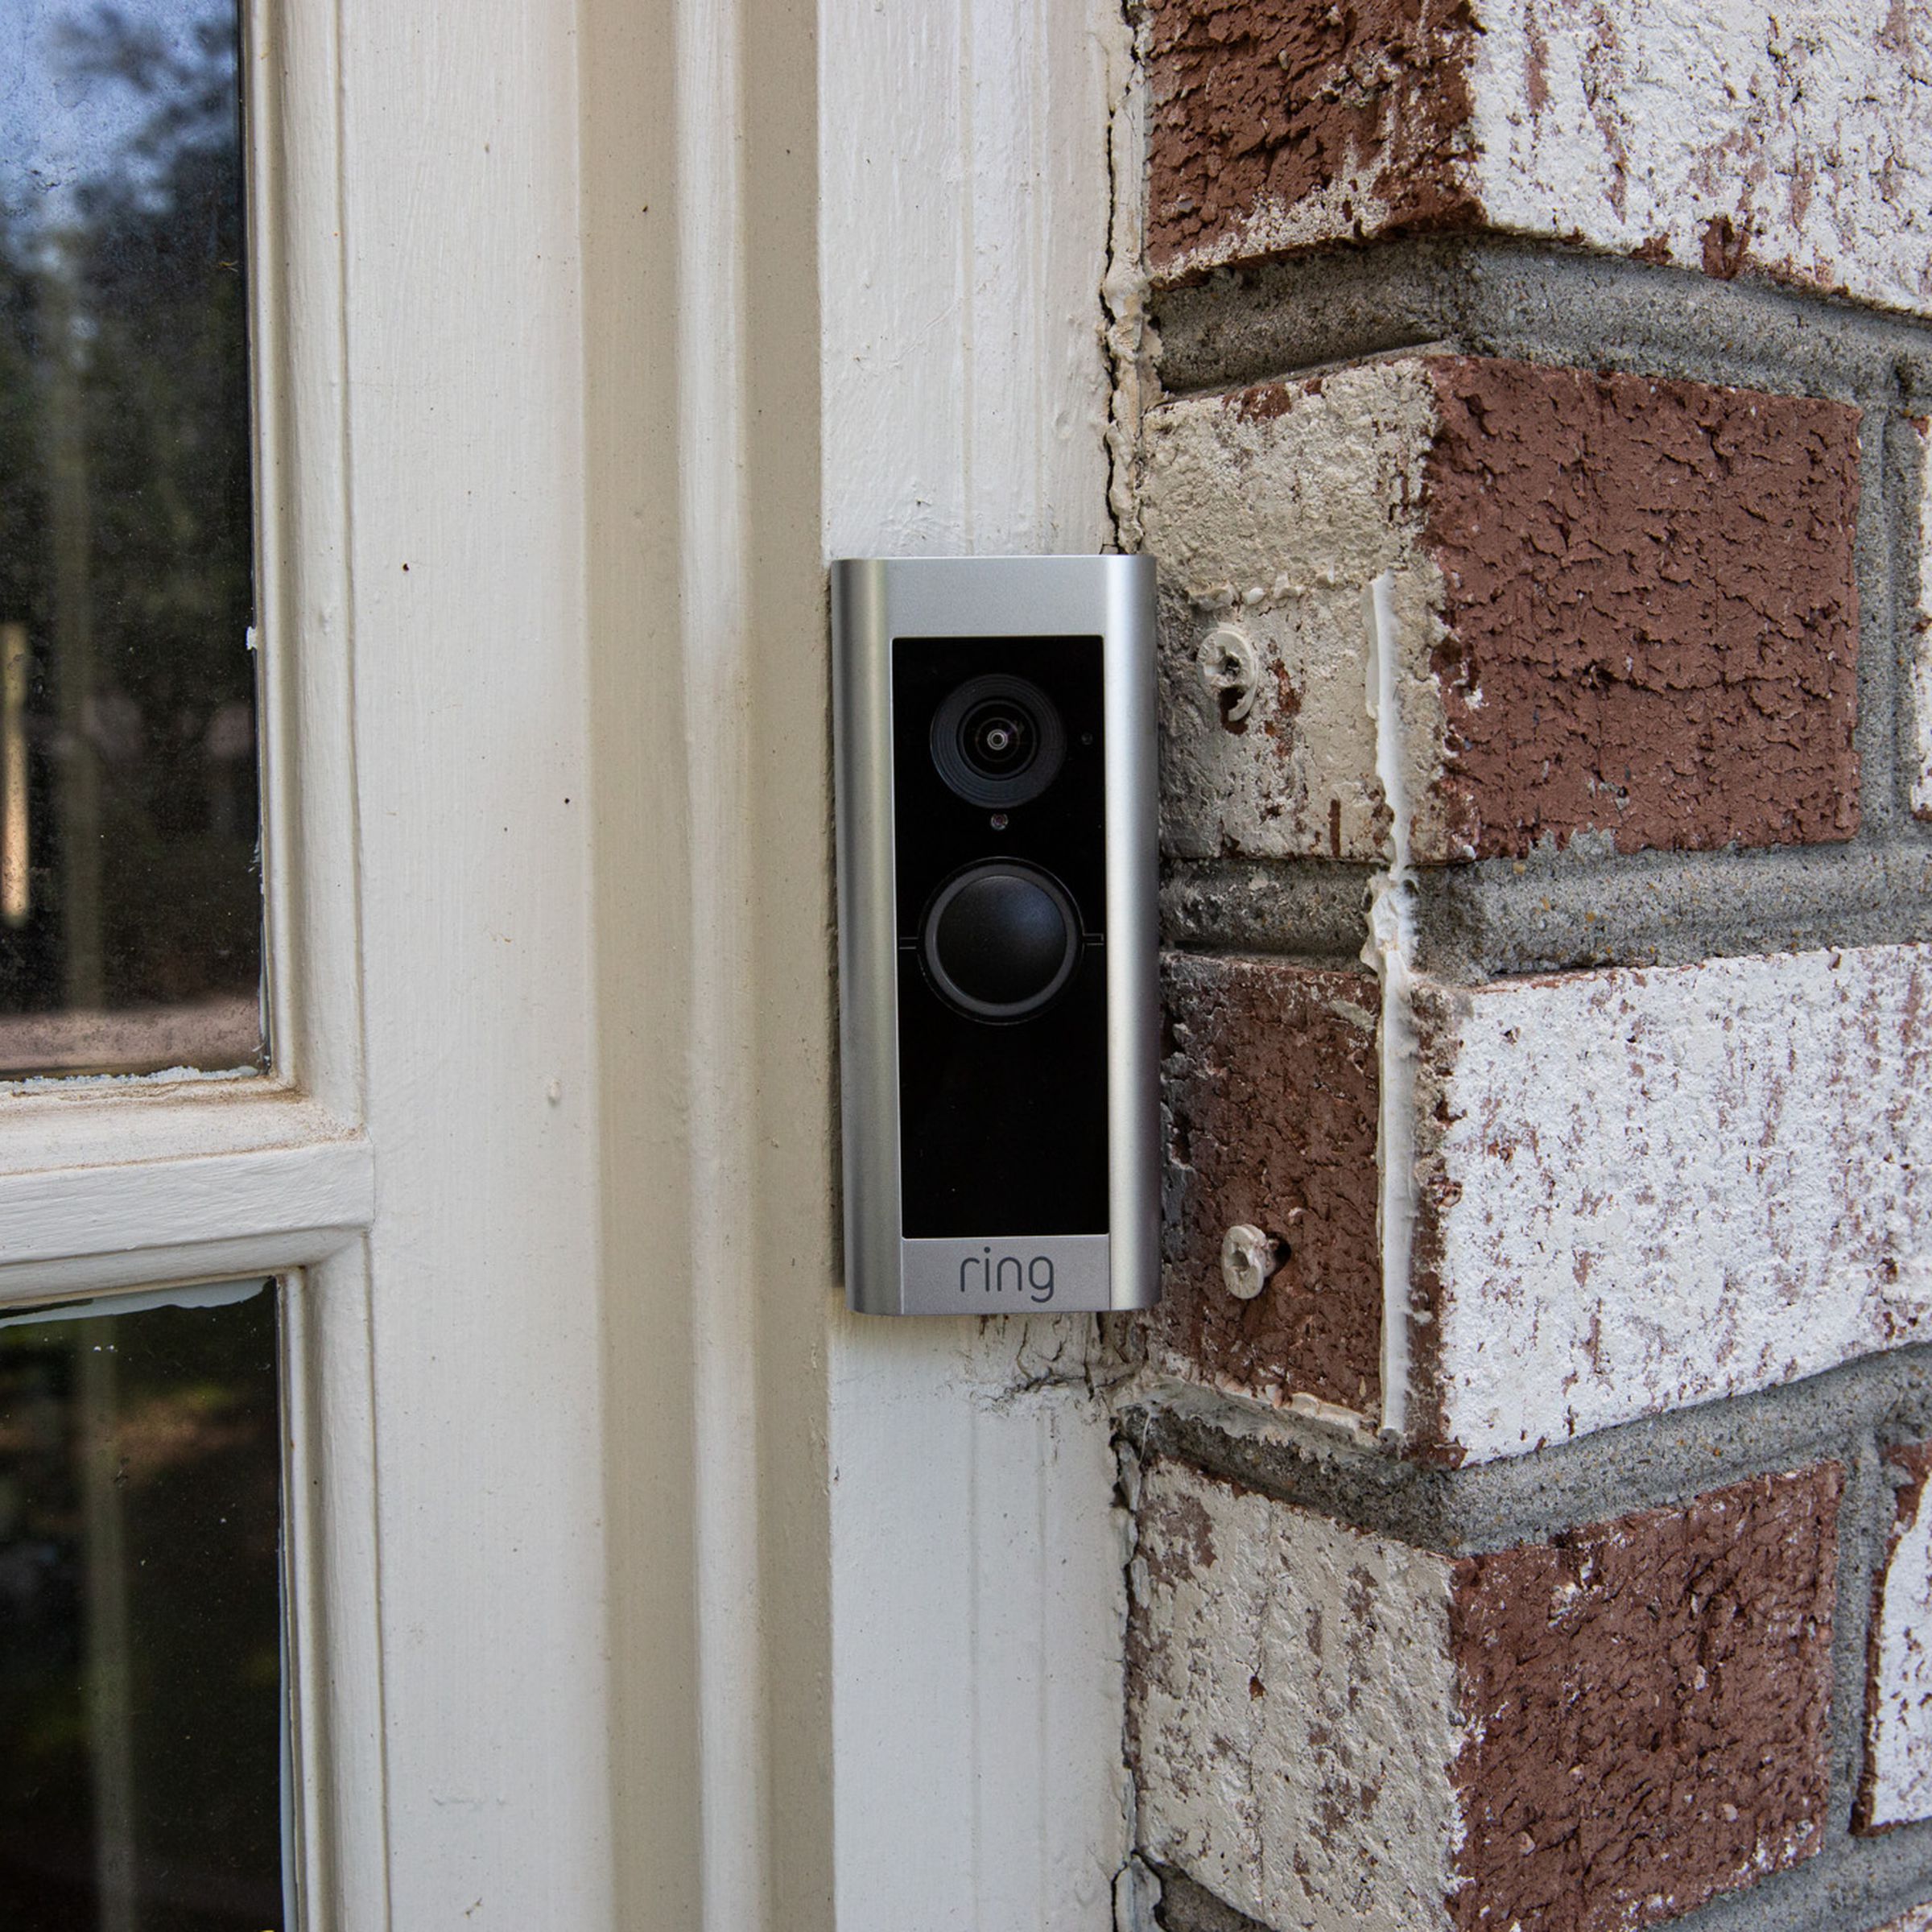 A Ring Video Doorbell Pro 2 mounted outside the front door of a house.